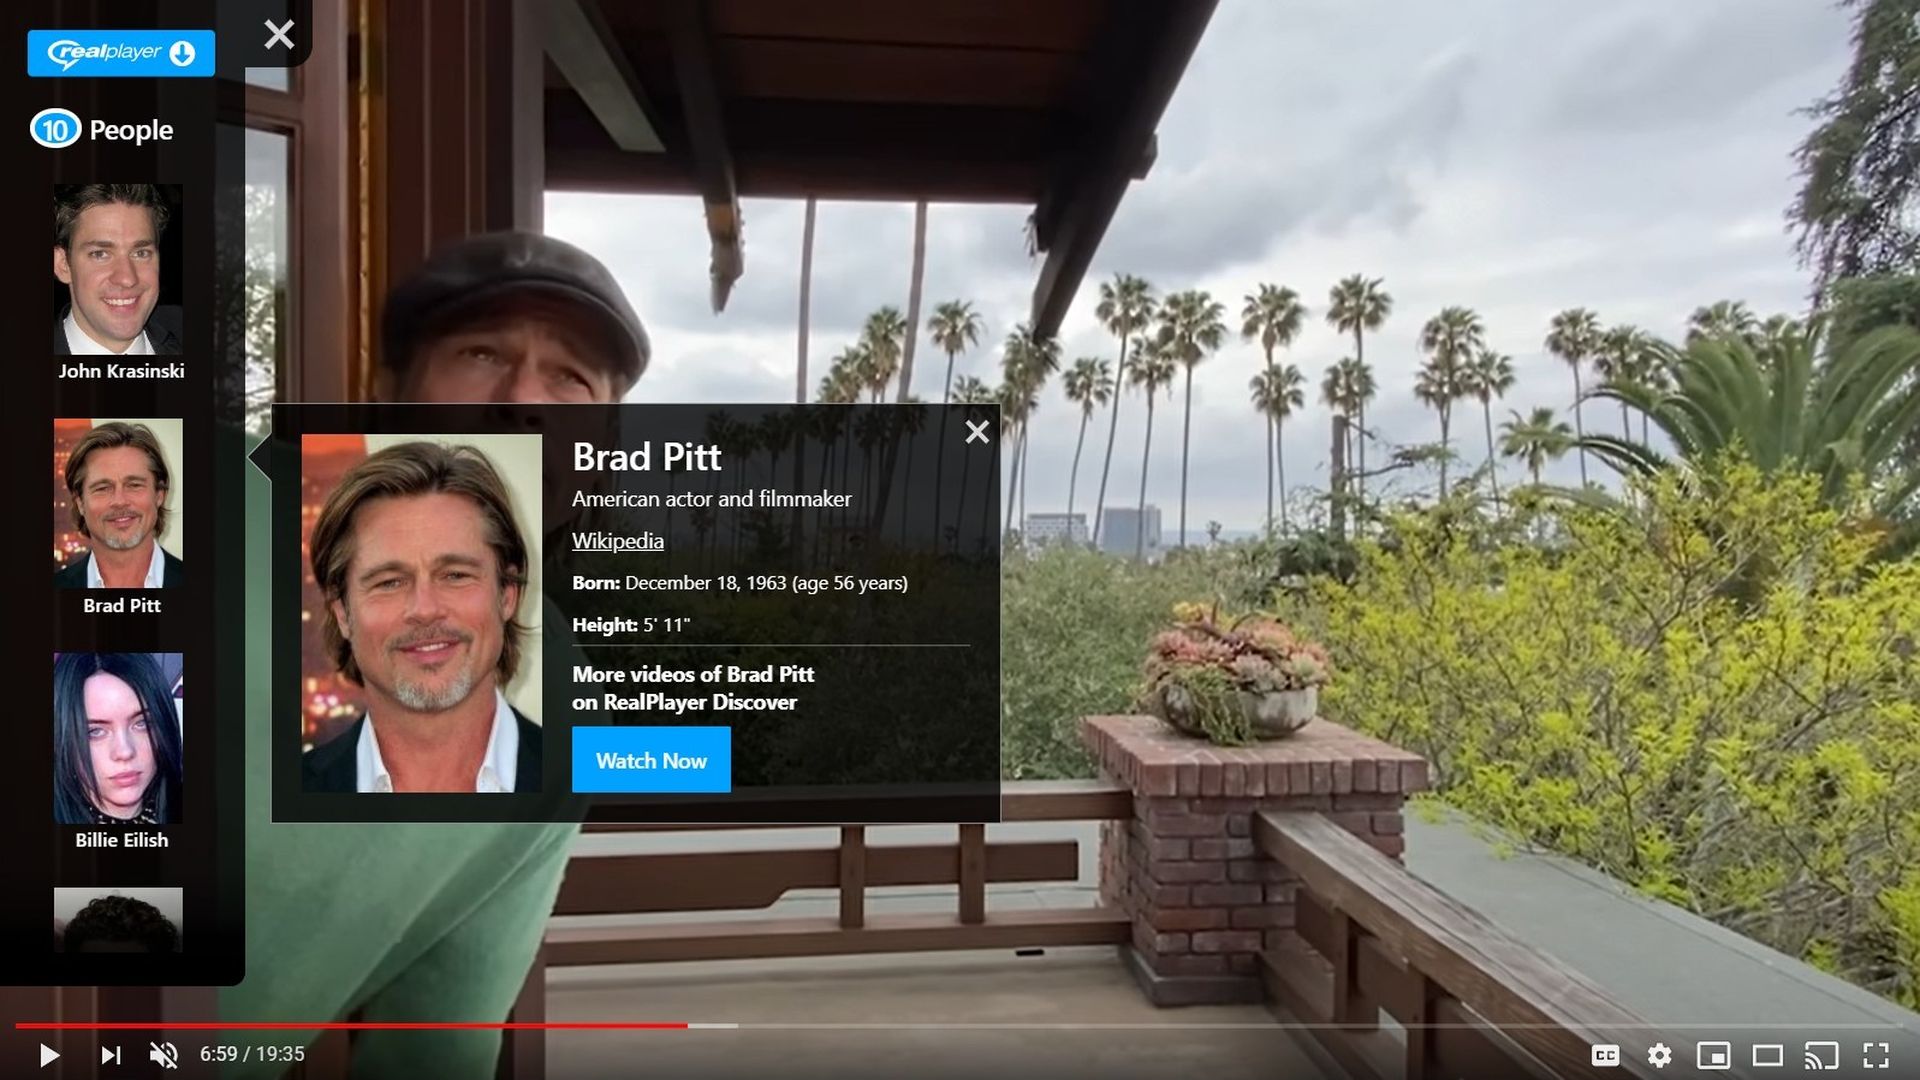 The StarSearch browser plugin uses AI and face recognition to spot celebrities in Netflix and YouTube